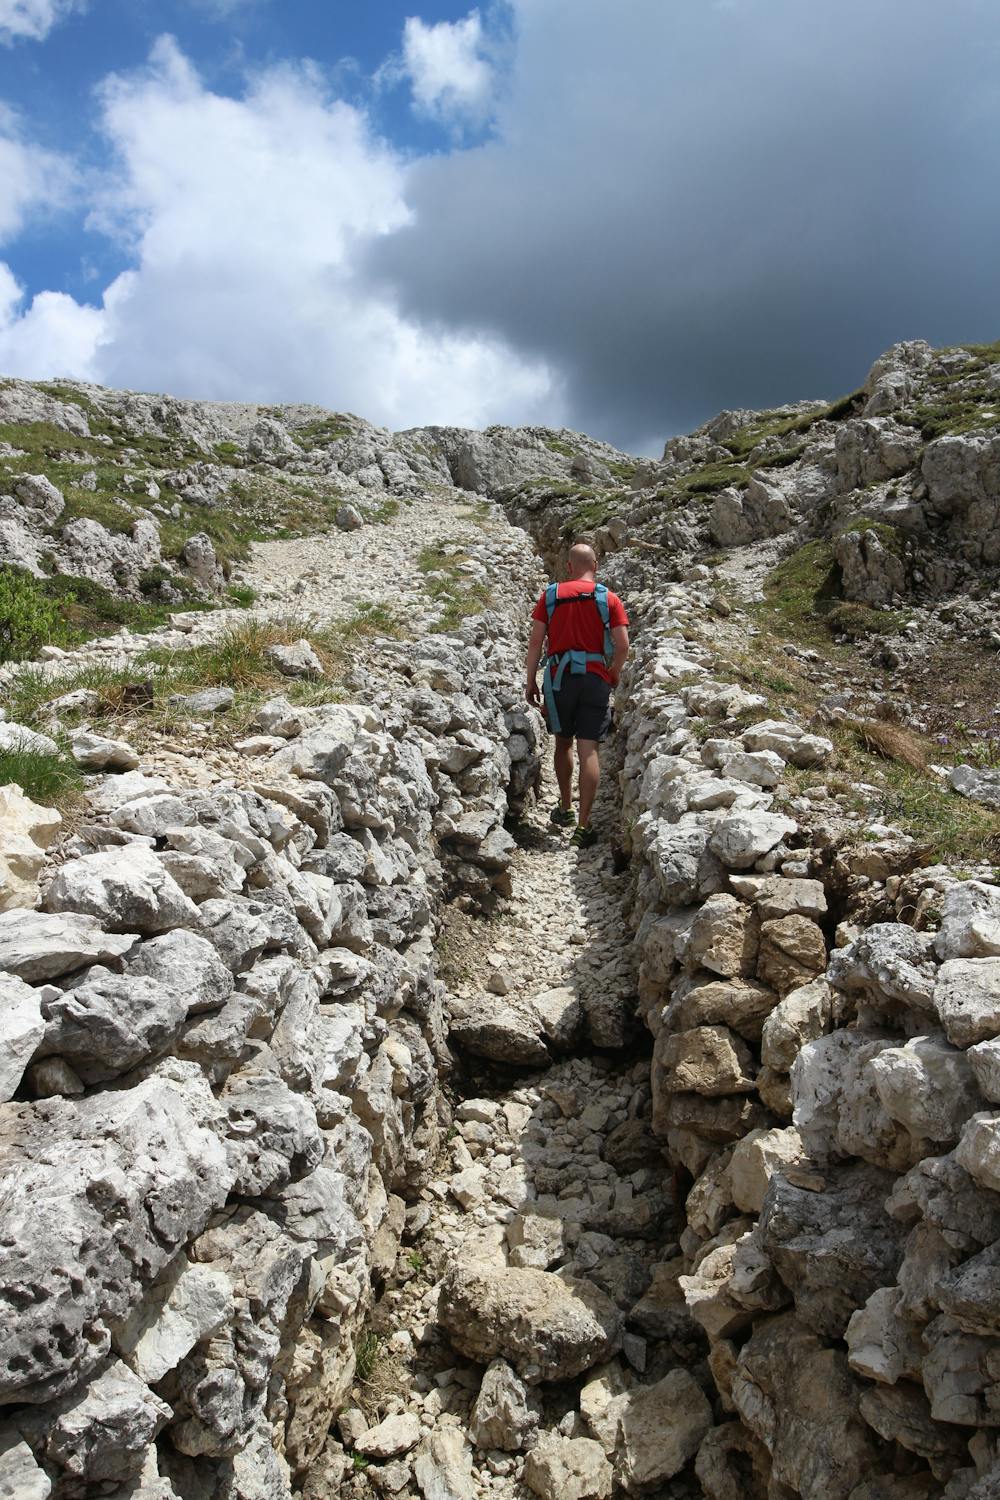 One of the narrow trench sections on the way to the summit